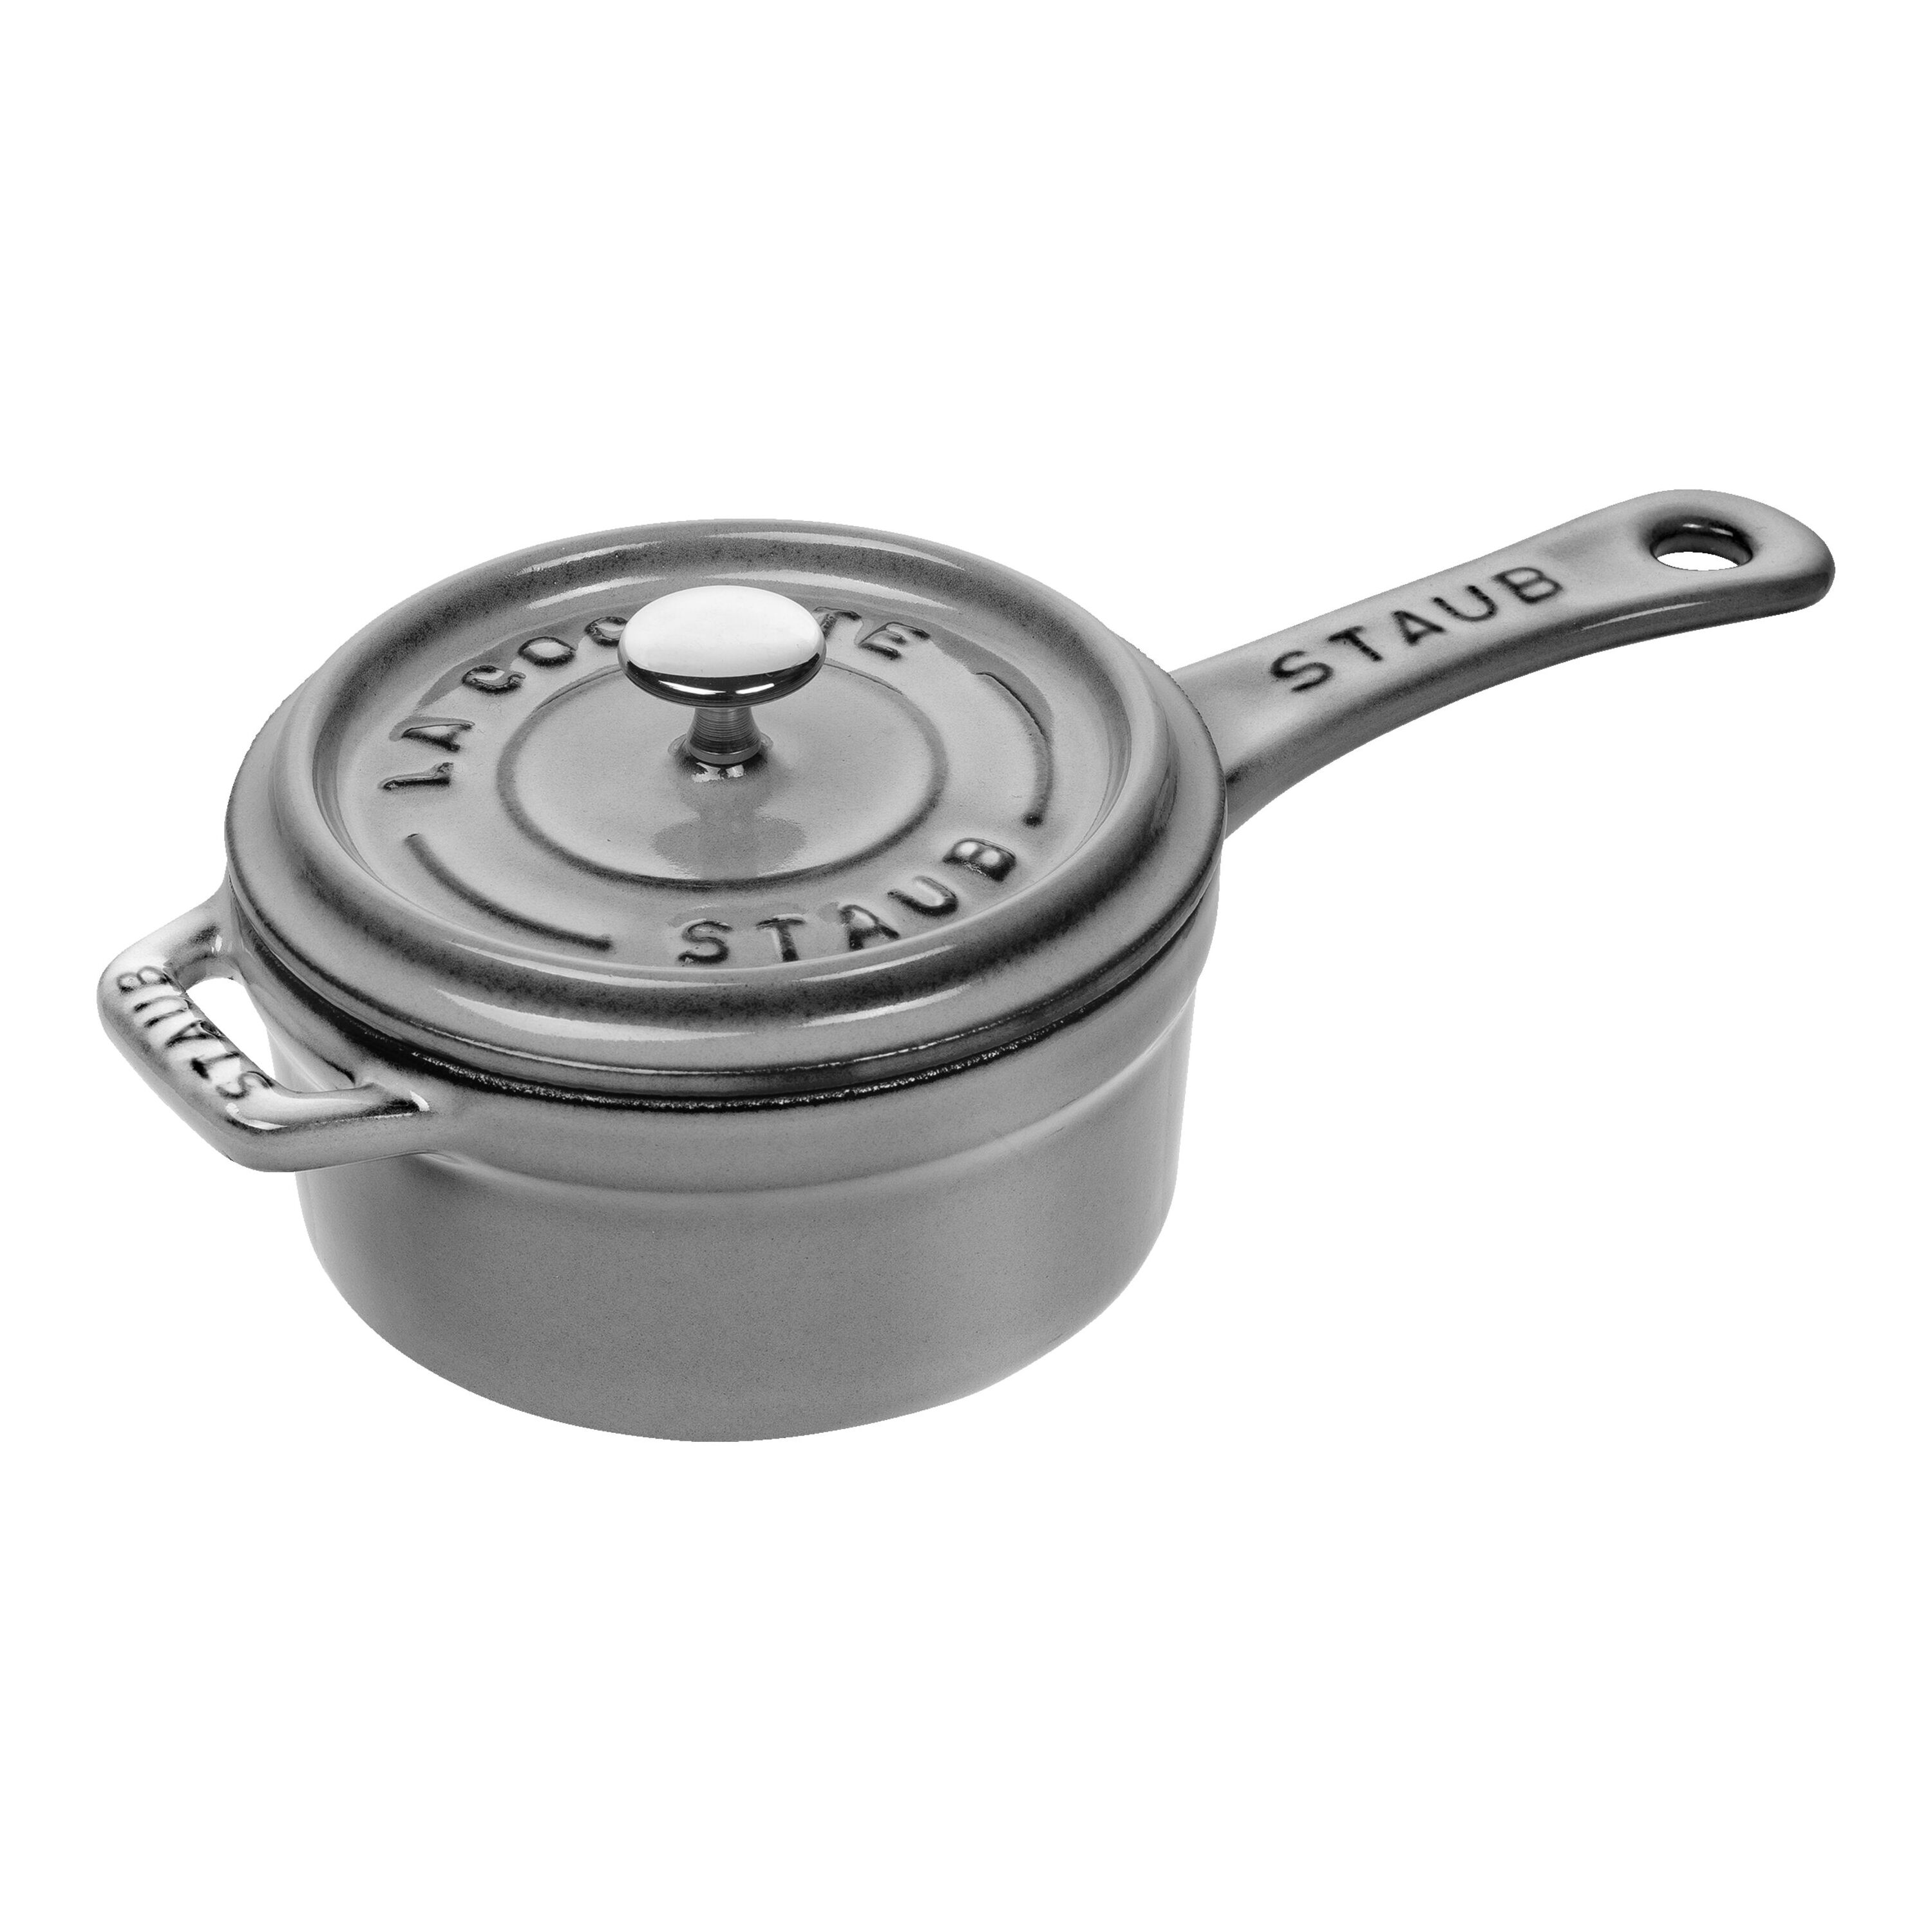 We get asked if it's safe to use metal utensils in STAUB cookware a lo